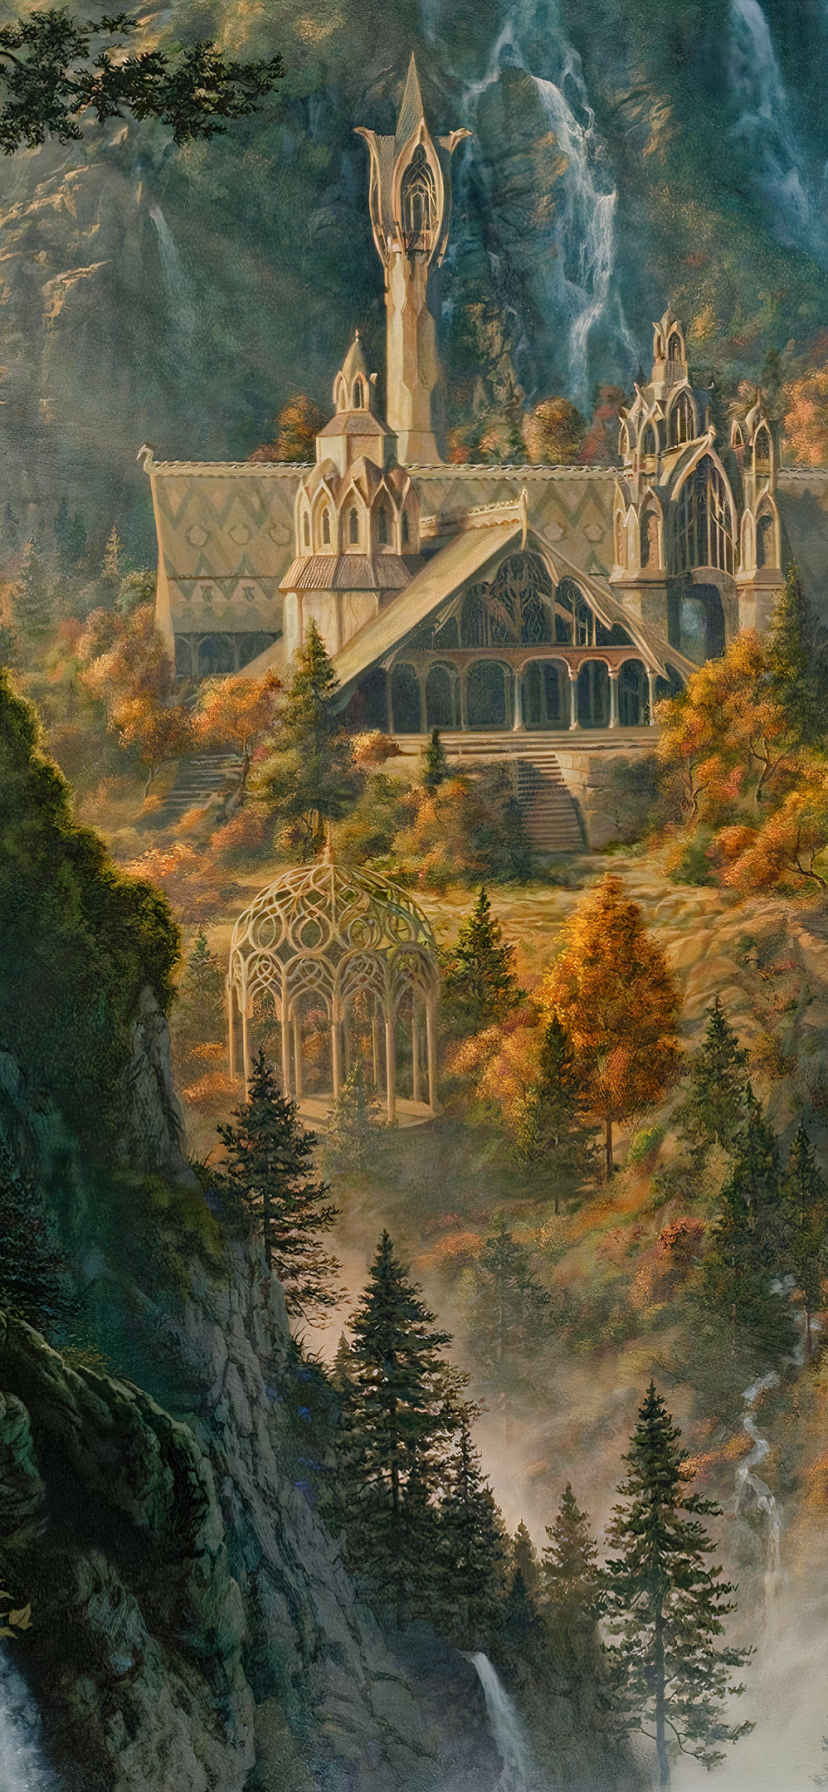 rivendell, movie, the lord of the rings